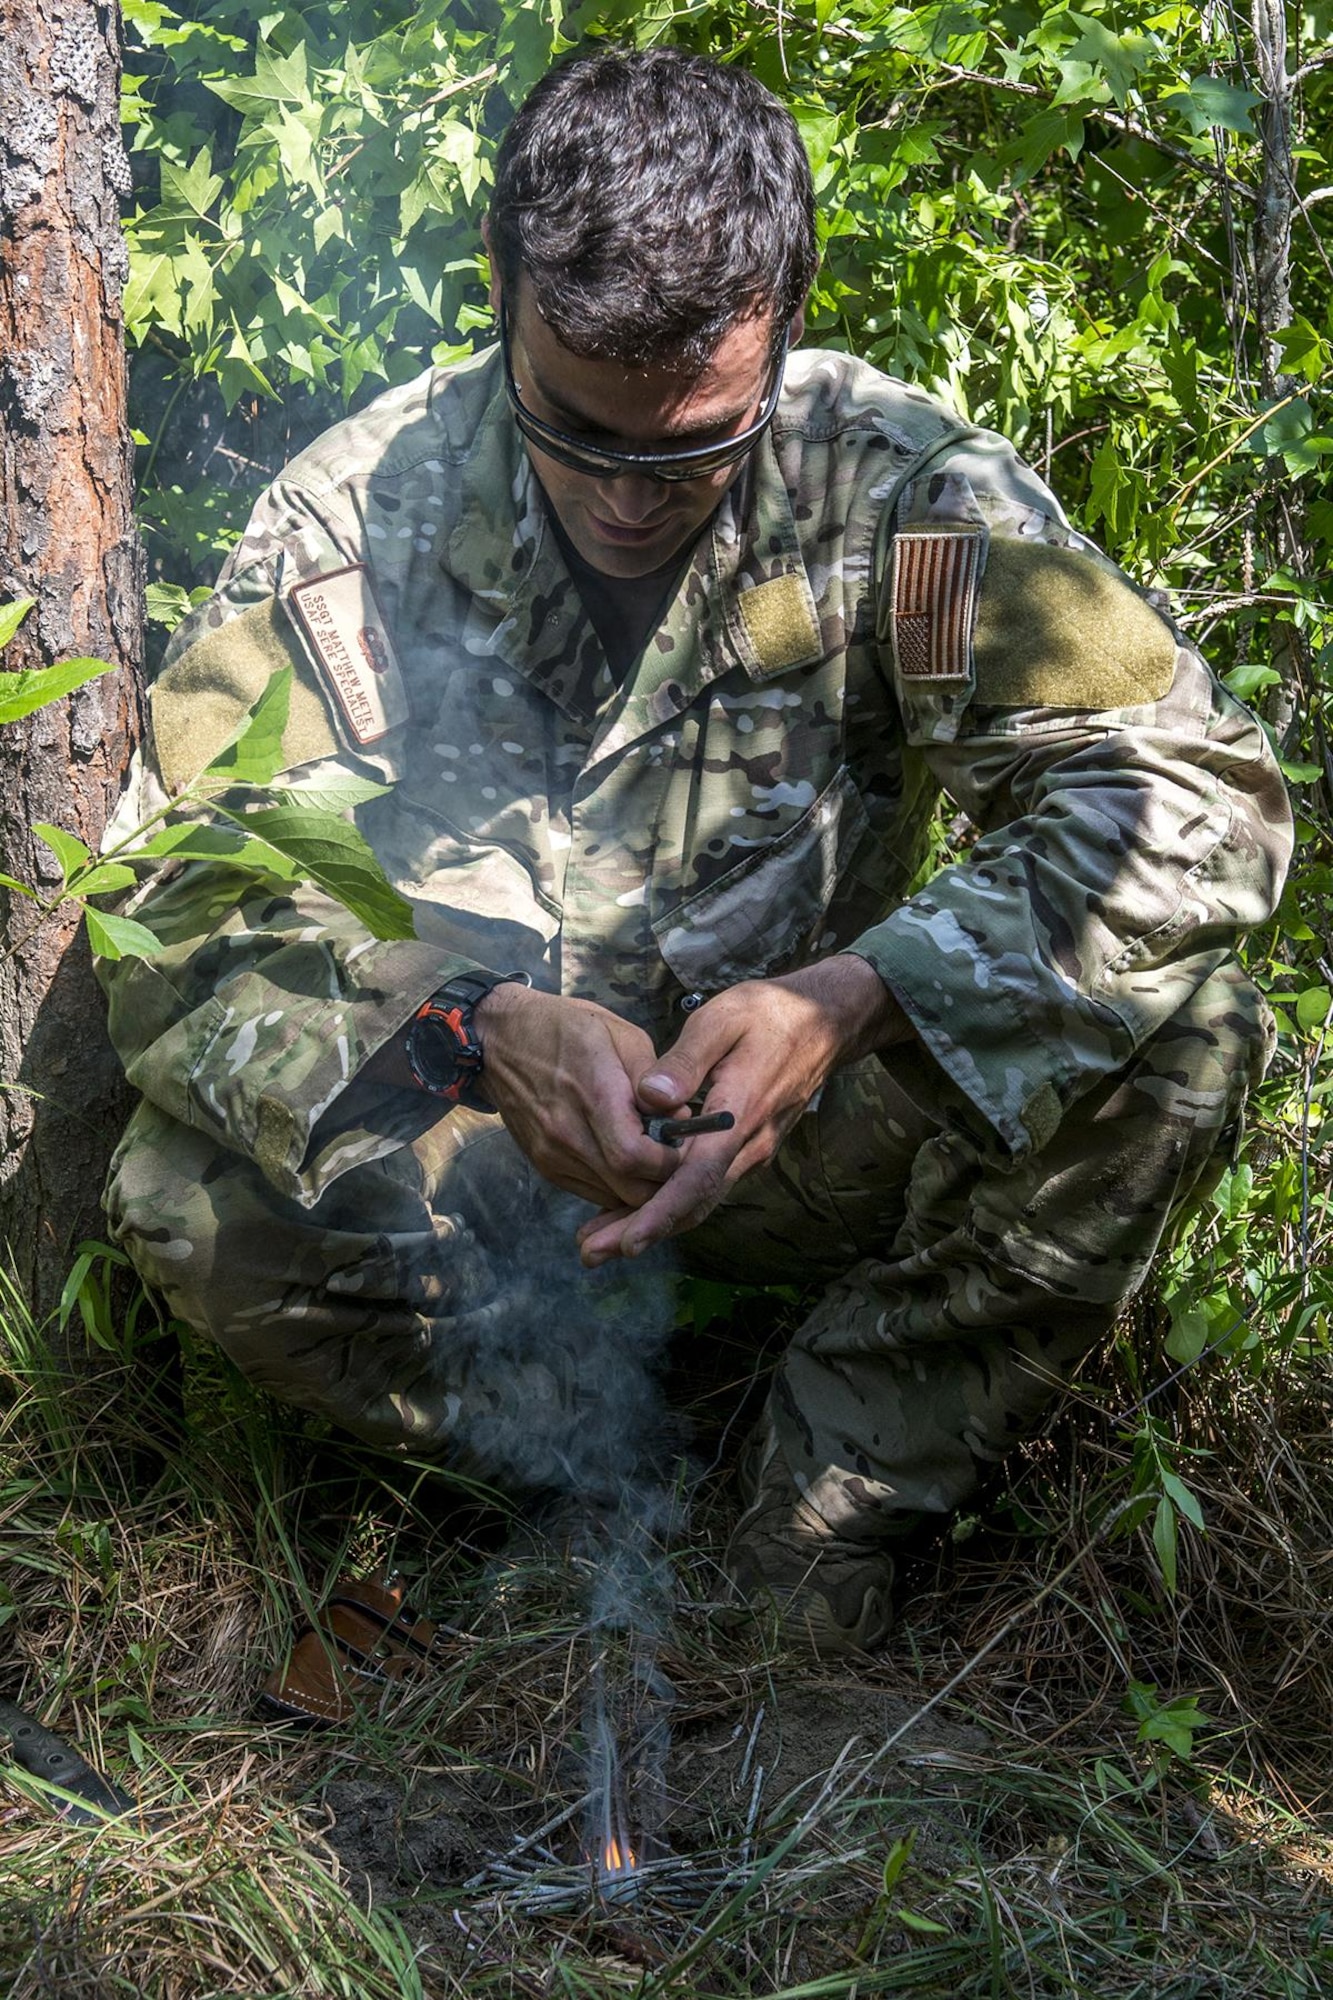 U.S. Air Force Staff Sgt. Matthew Mete, 2nd Operations Support Squadron SERE instructor, builds a fire during training on May 14, 2016, Claiborne Gunnery and Bombing Range, La. SERE, which stands for Survival, Evasion, Resistance and Escape, is required training for all aircrew members and provides the knowledge and tools necessary to survive on their own in any environment and under any condition should they have to abandon their aircraft. (U.S. Air Force photo by Master Sgt. Greg Steele/Released)